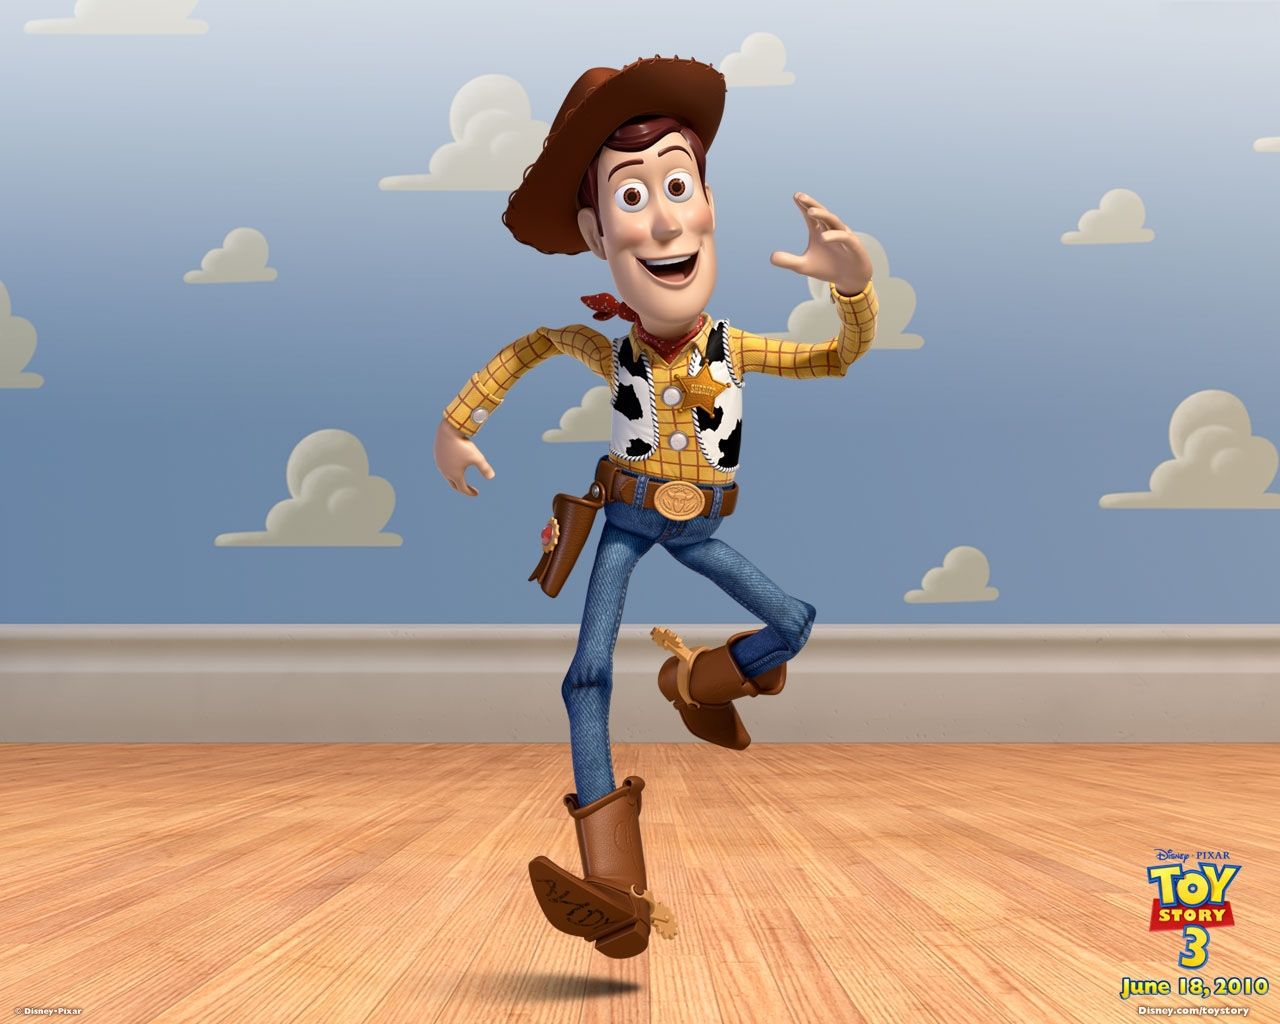 Woody Portrait Cloud Wall Wallpaper 1280×1024 - Toy Story Wallpapers